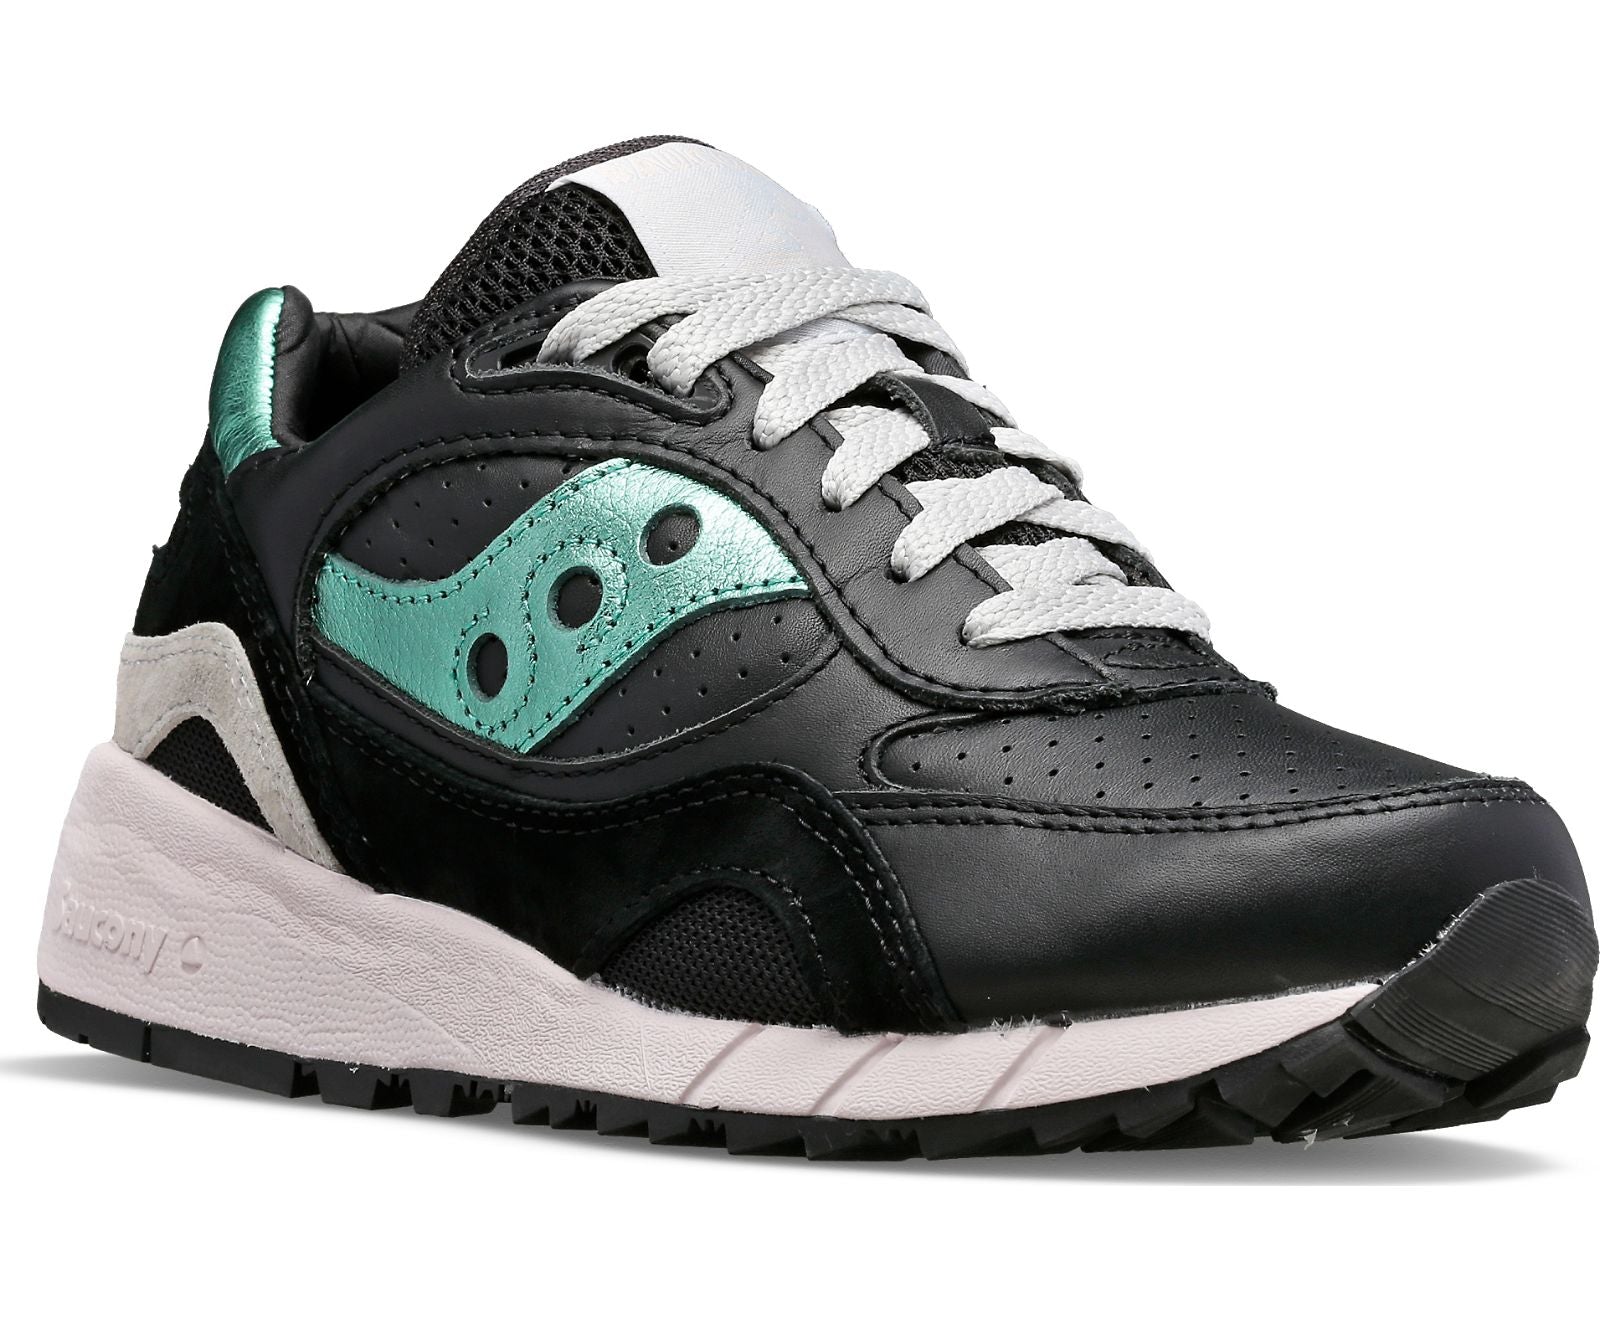 Front angle view of the Saucony Shadow 6000 leather lifestyle shoe in the color Black/Aquamarine